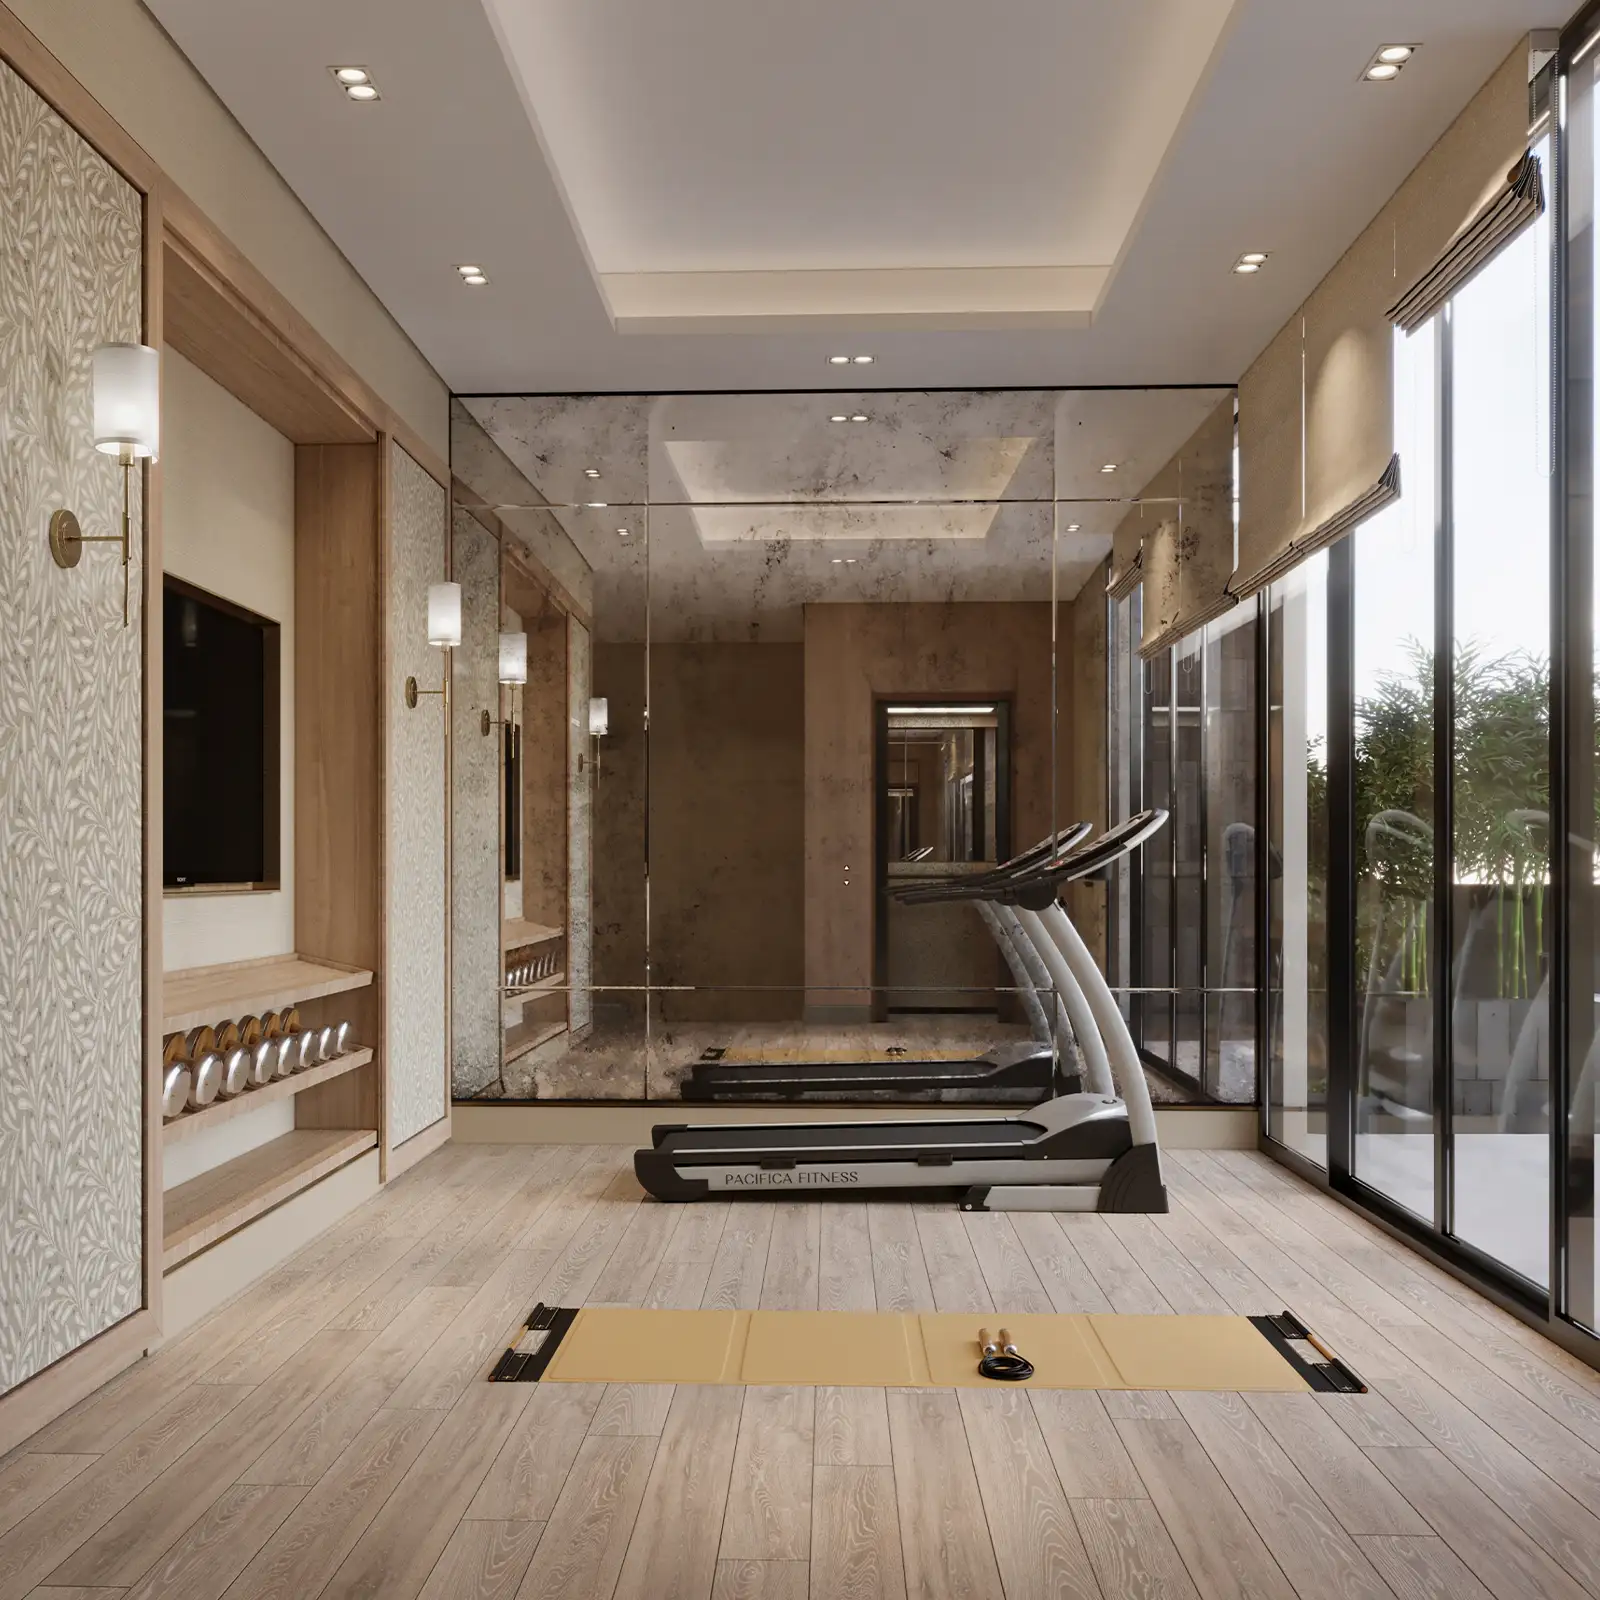 Spacious and well-lit home gym interior design, featuring a sleek treadmill, mirrored walls, a yoga mat setup, and a serene outdoor view through large glass doors, combining functionality with modern aesthetics for a motivating workout environment